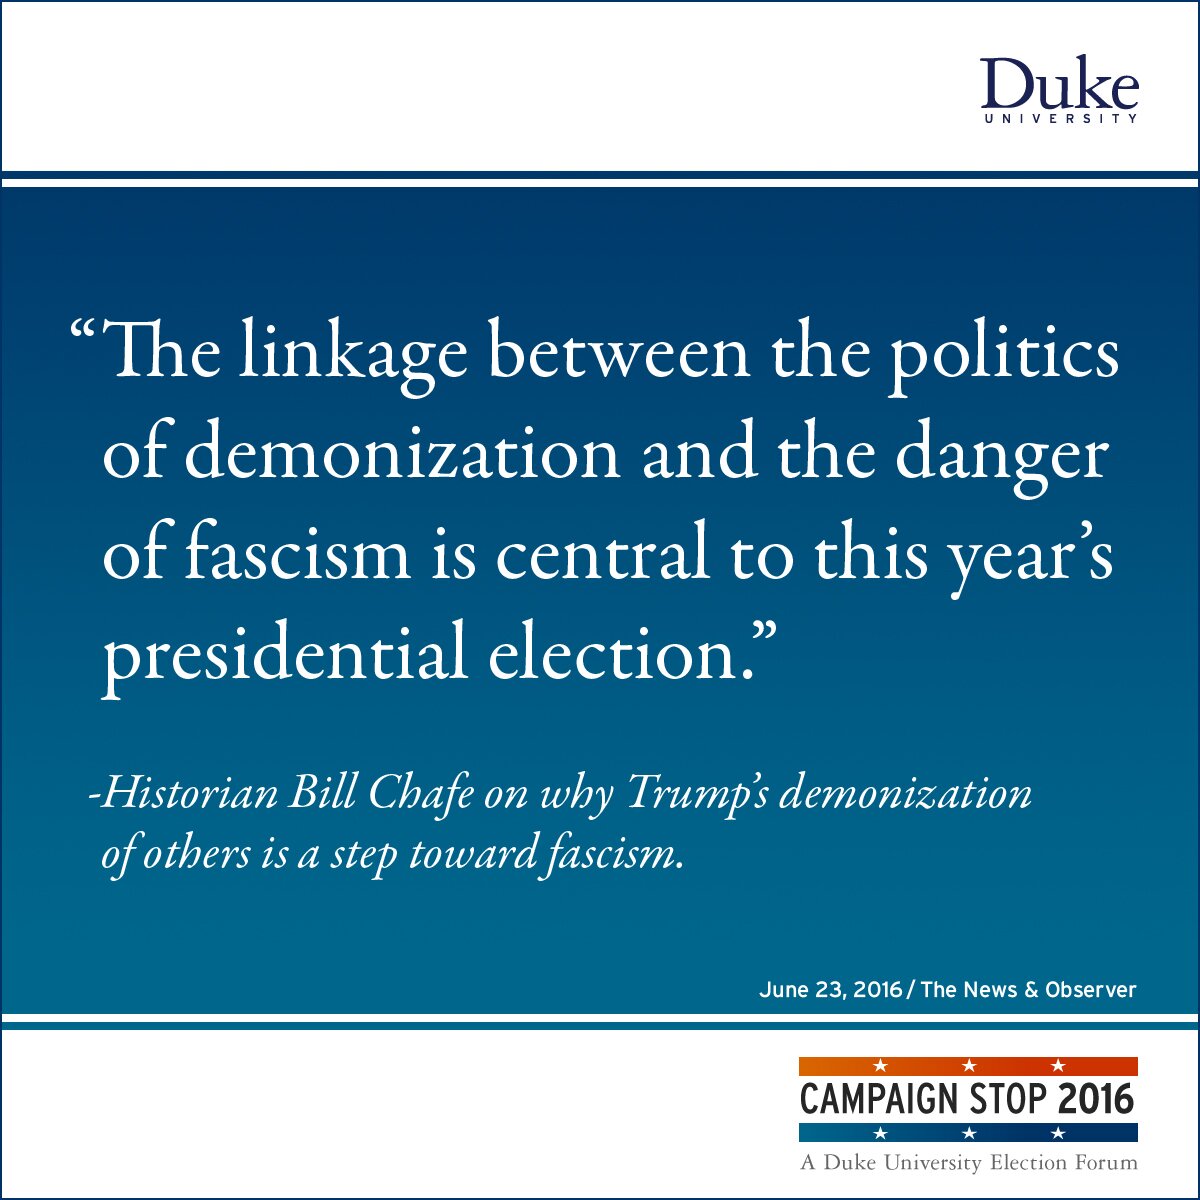 “The linkage between the politics of demonization and the danger of fascism is central to this year’s presidential election.” -Historian Bill Chafe on why Trump’s demonization of others is a step toward fascism.